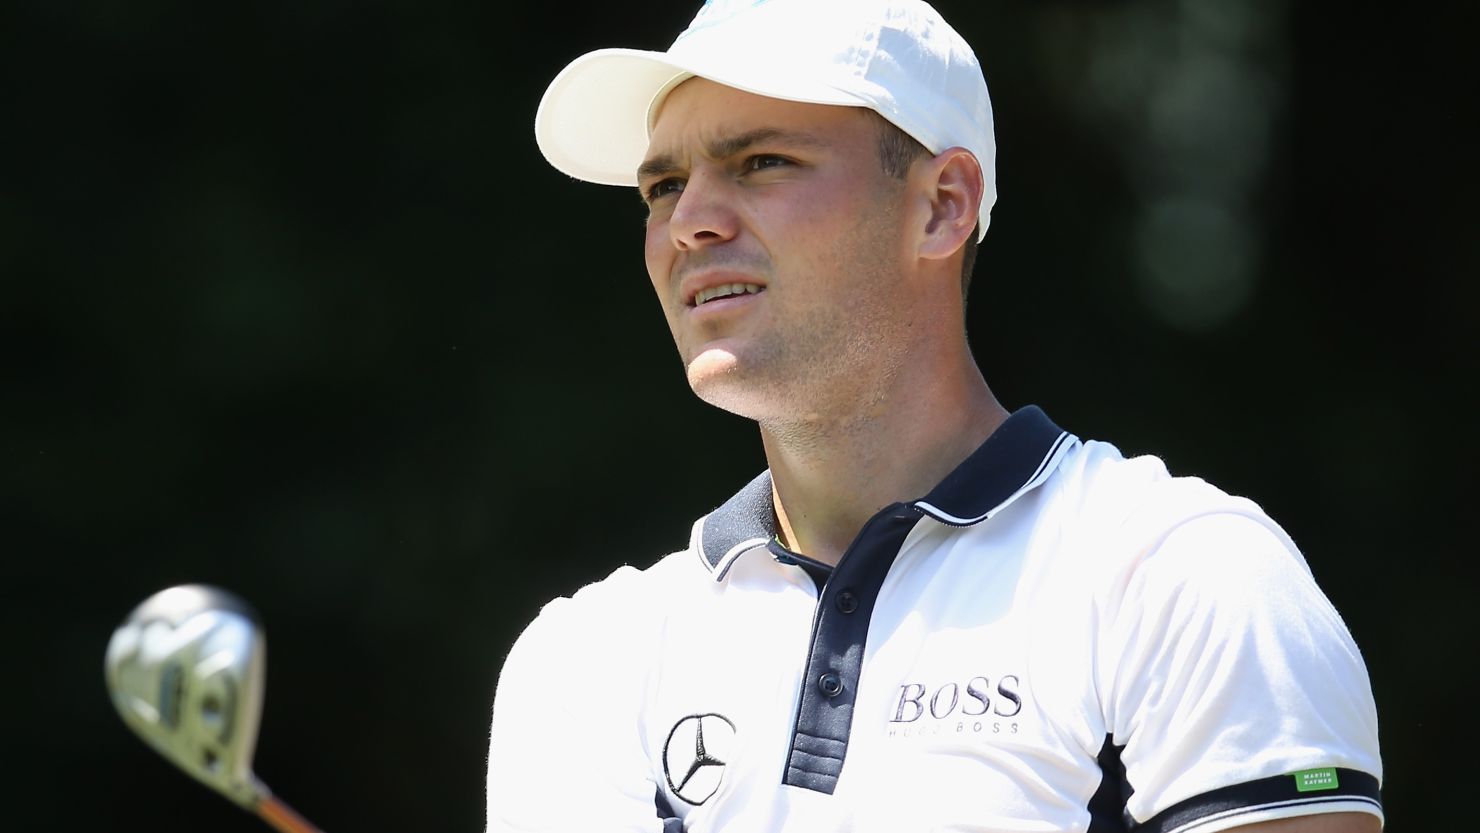 Martin Kaymer conjured up a superb finish at Sawgrass to take a two-shot lead after the first round.